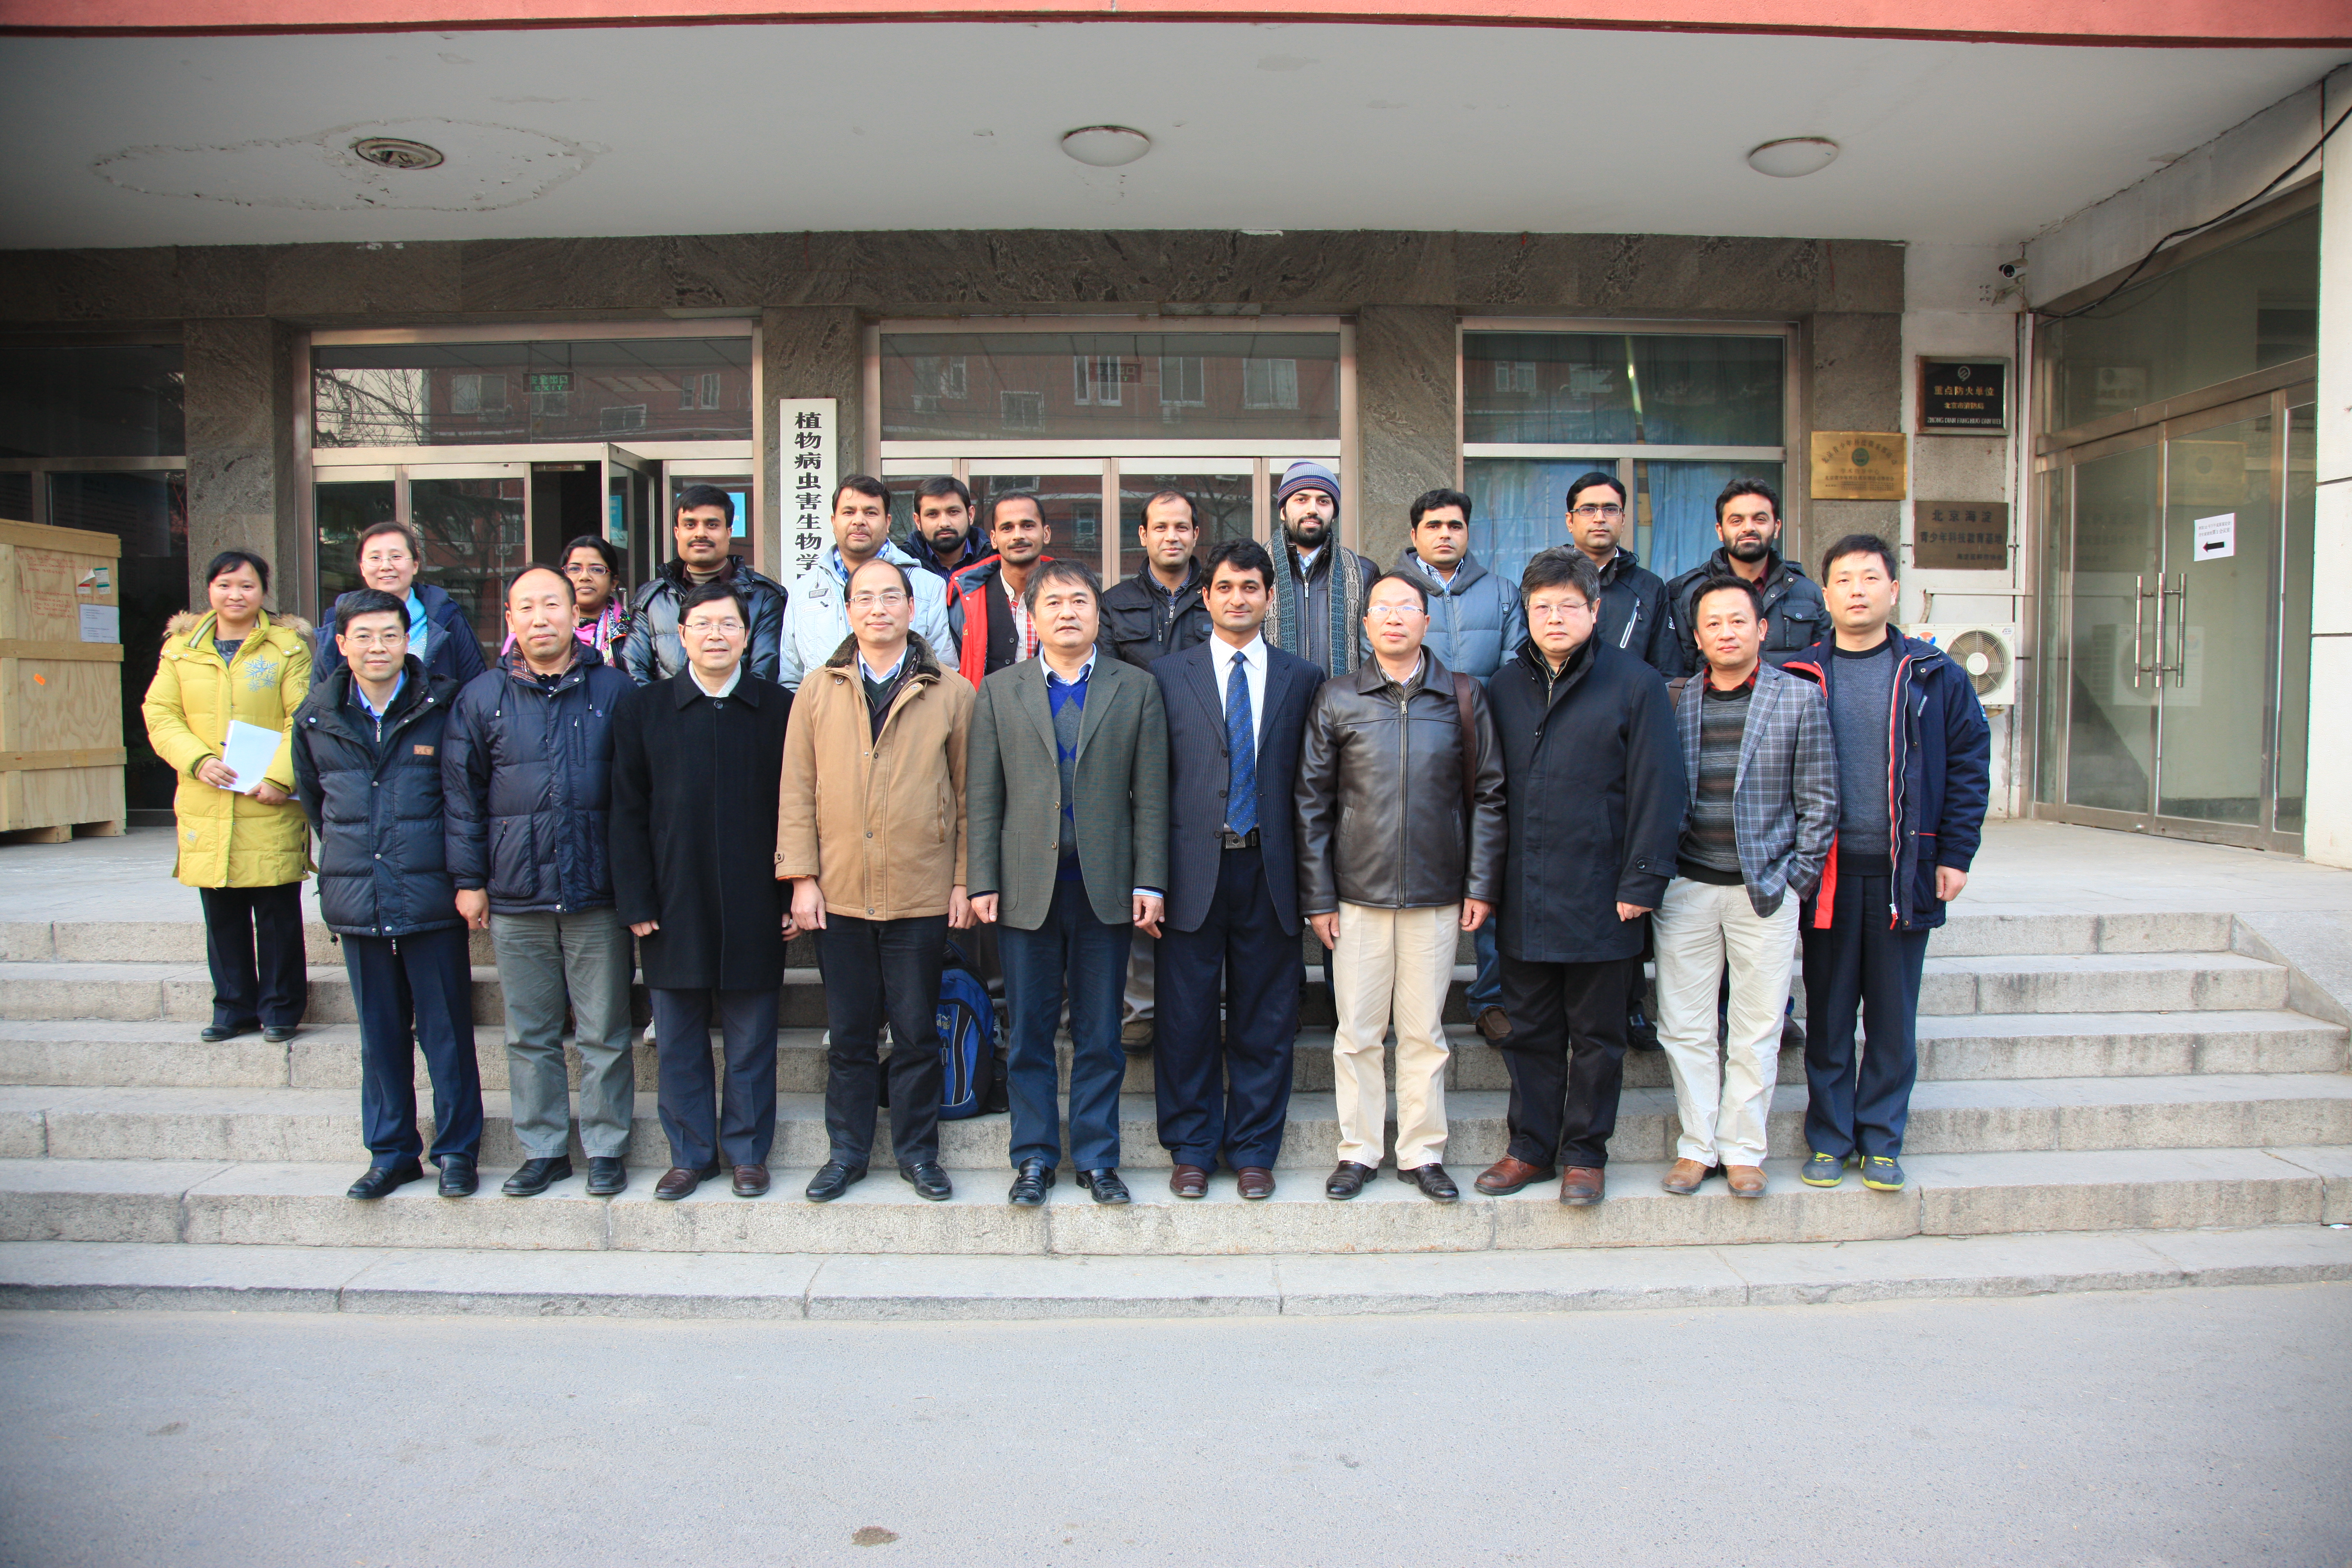 Pak students graduated from Chinese institutions playing important role in technology transfer